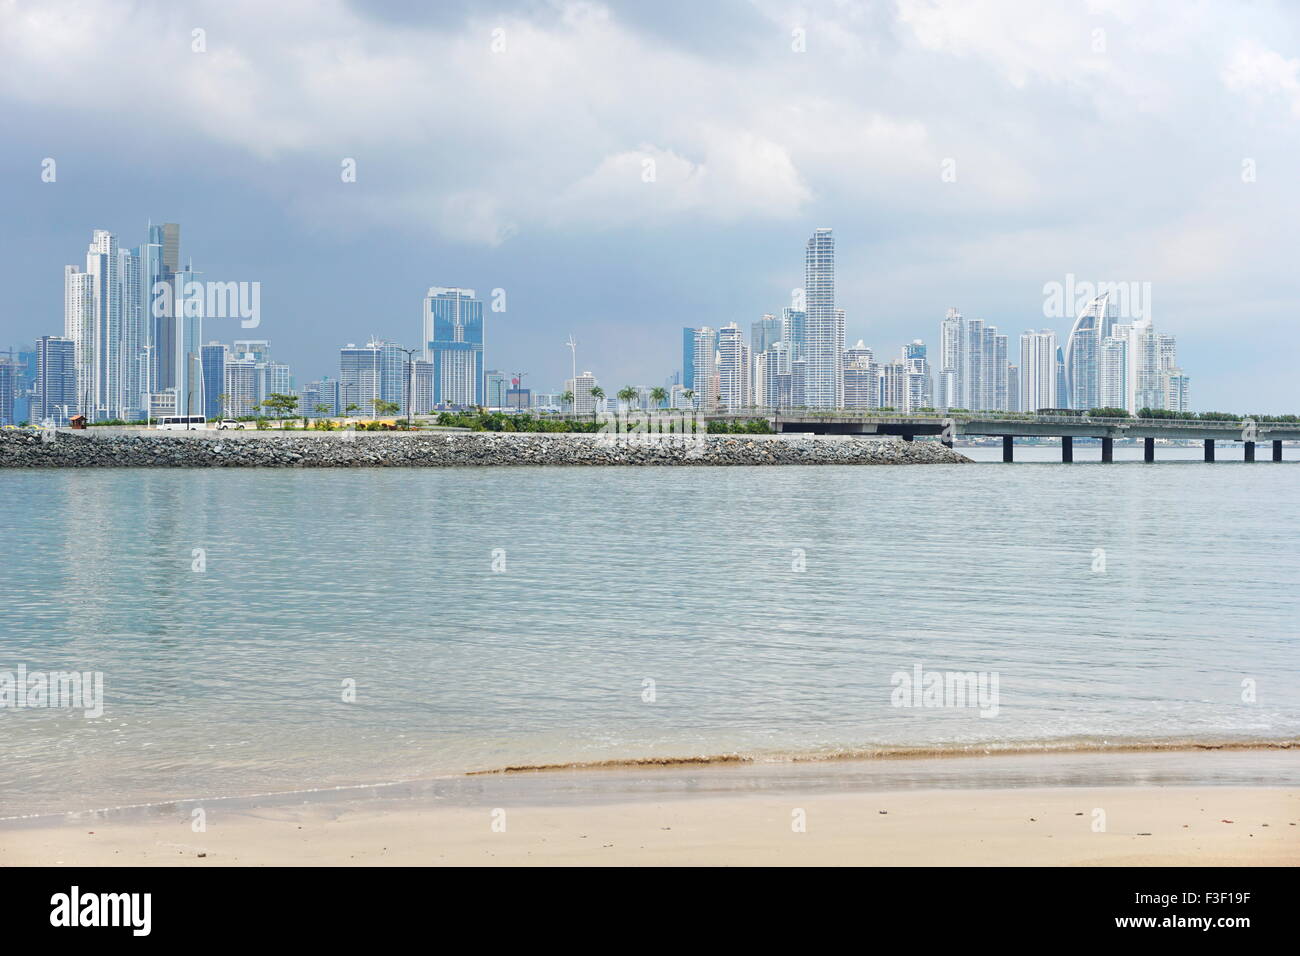 Panama City skyscrapers skyline viewed from a beach of the Pacific coast, Panama, Central America Stock Photo